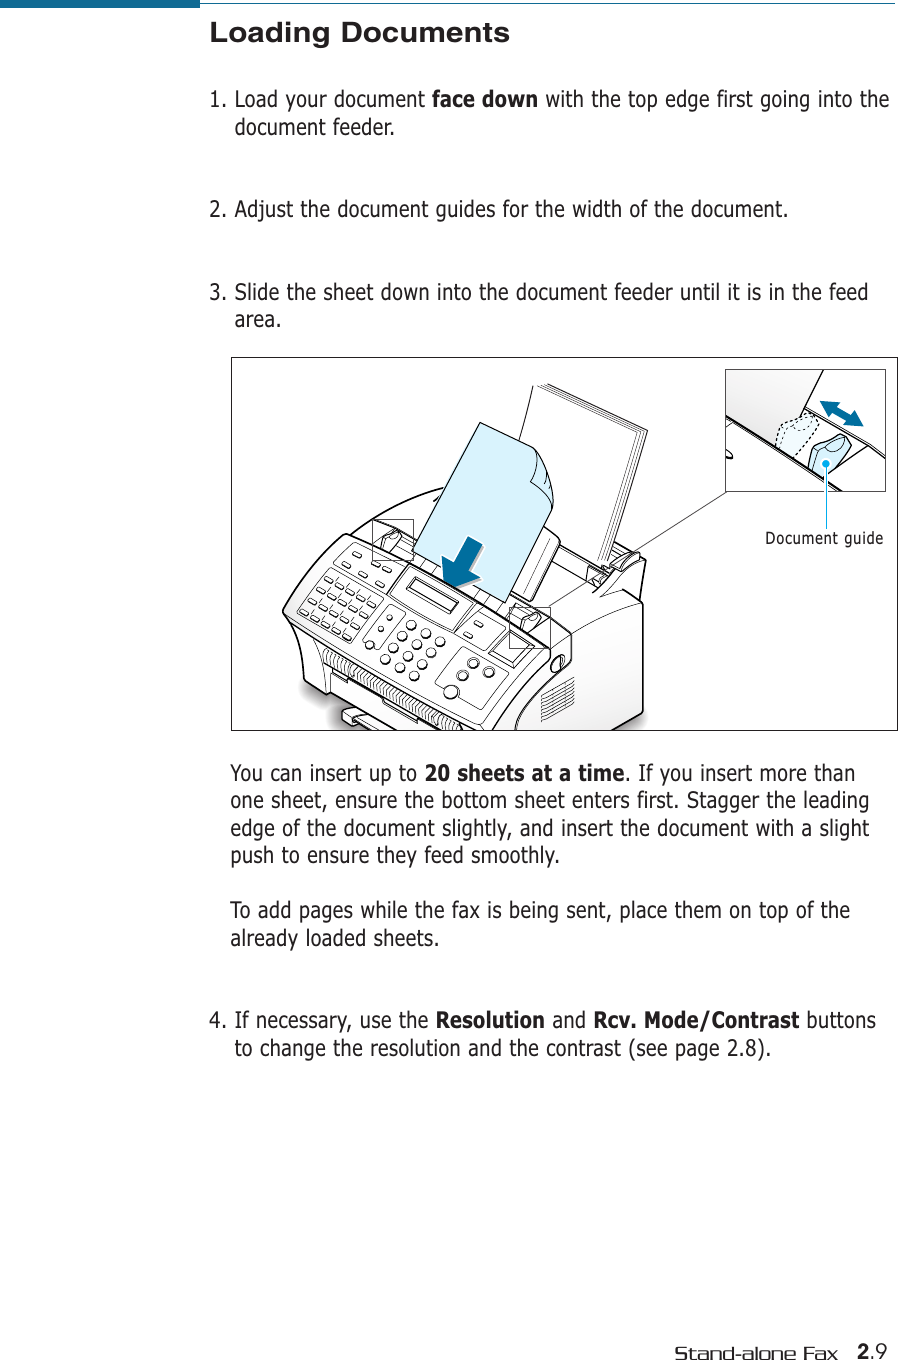 2.9Stand-alone FaxLoading Documents1. Load your document face down with the top edge first going into thedocument feeder. 2. Adjust the document guides for the width of the document. 3. Slide the sheet down into the document feeder until it is in the feedarea. You can insert up to 20 sheets at a time. If you insert more thanone sheet, ensure the bottom sheet enters first. Stagger the leadingedge of the document slightly, and insert the document with a slightpush to ensure they feed smoothly. To add pages while the fax is being sent, place them on top of thealready loaded sheets. 4. If necessary, use the Resolution and Rcv. Mode/Contrast buttonsto change the resolution and the contrast (see page 2.8).Document guide